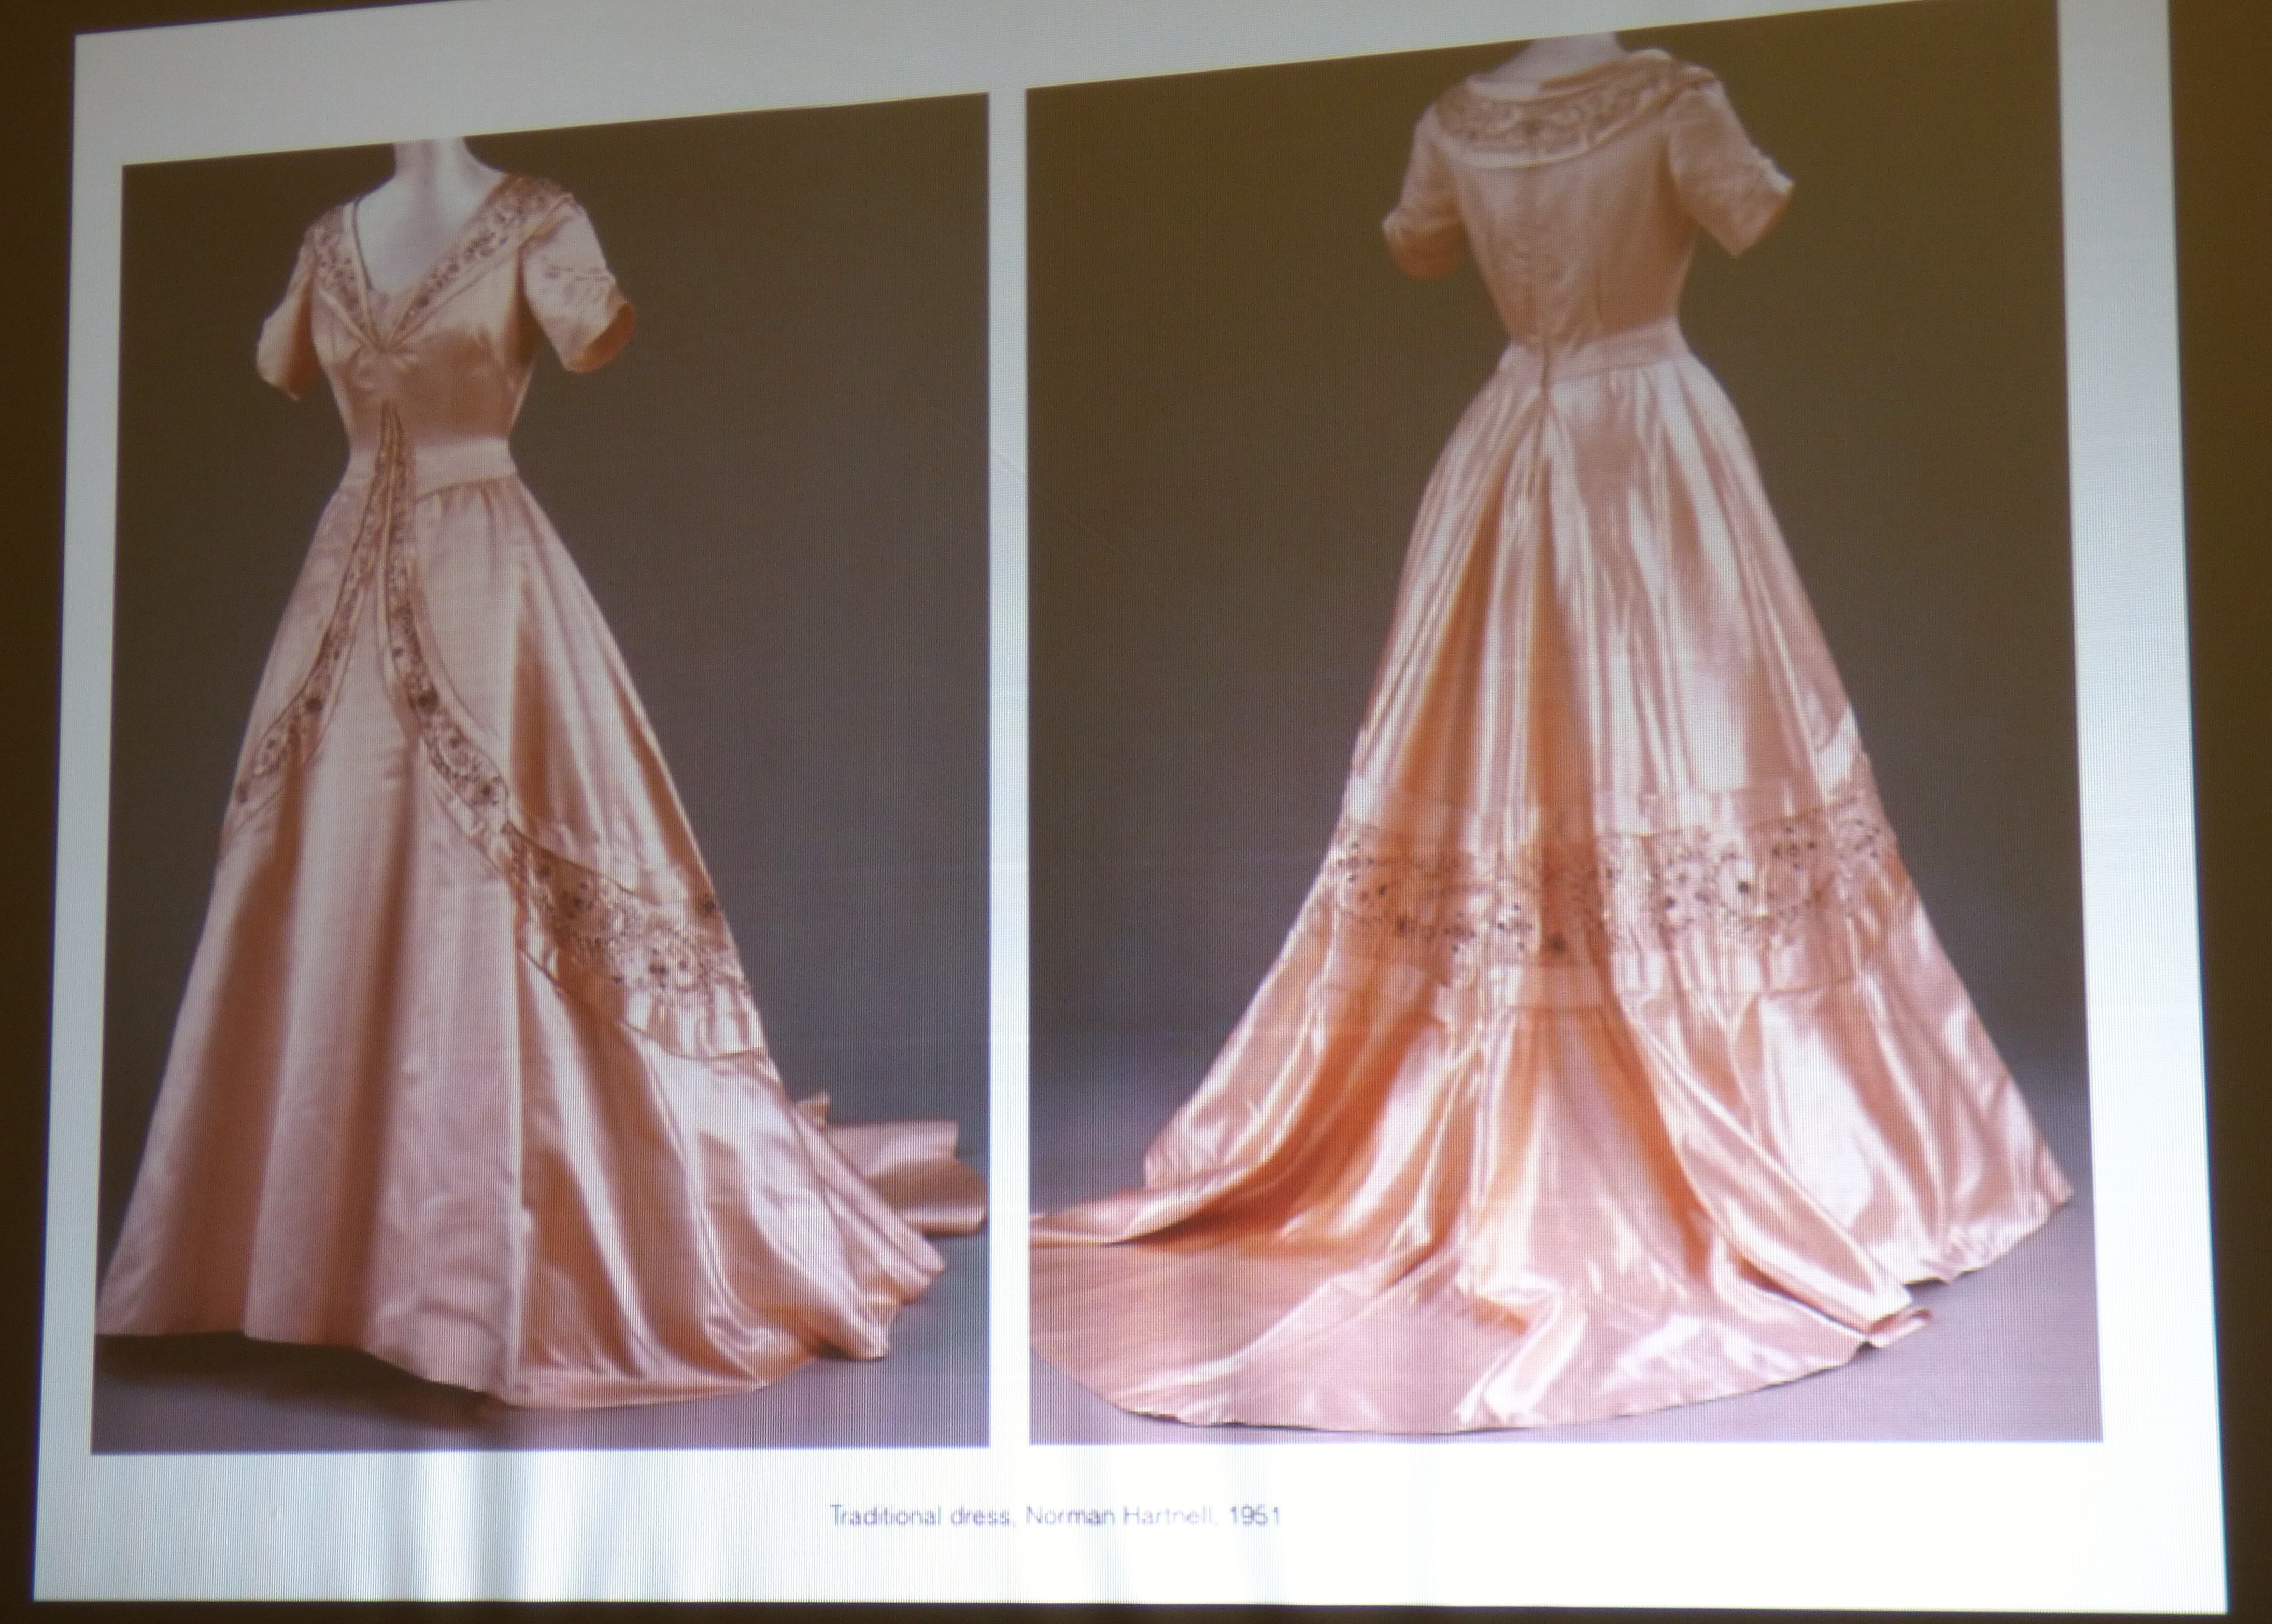 slide showing a traditional wedding dress by Norman Hartnell 1951